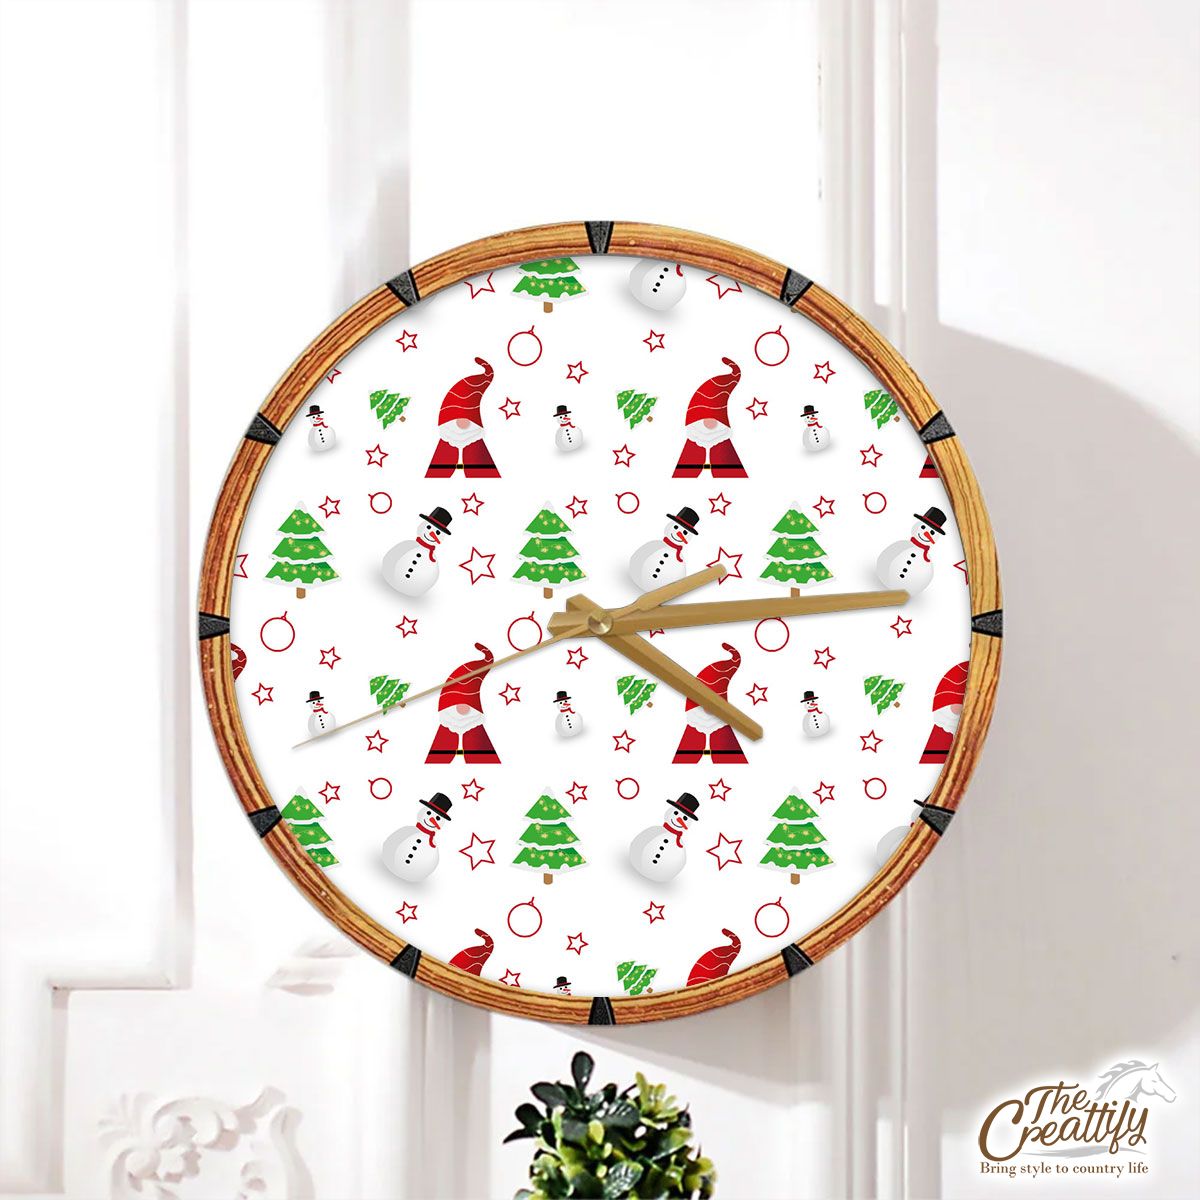 Santa Claus, Snowman Clipart And Pine Tree Silhouette Seamless Pattern Wall Clock